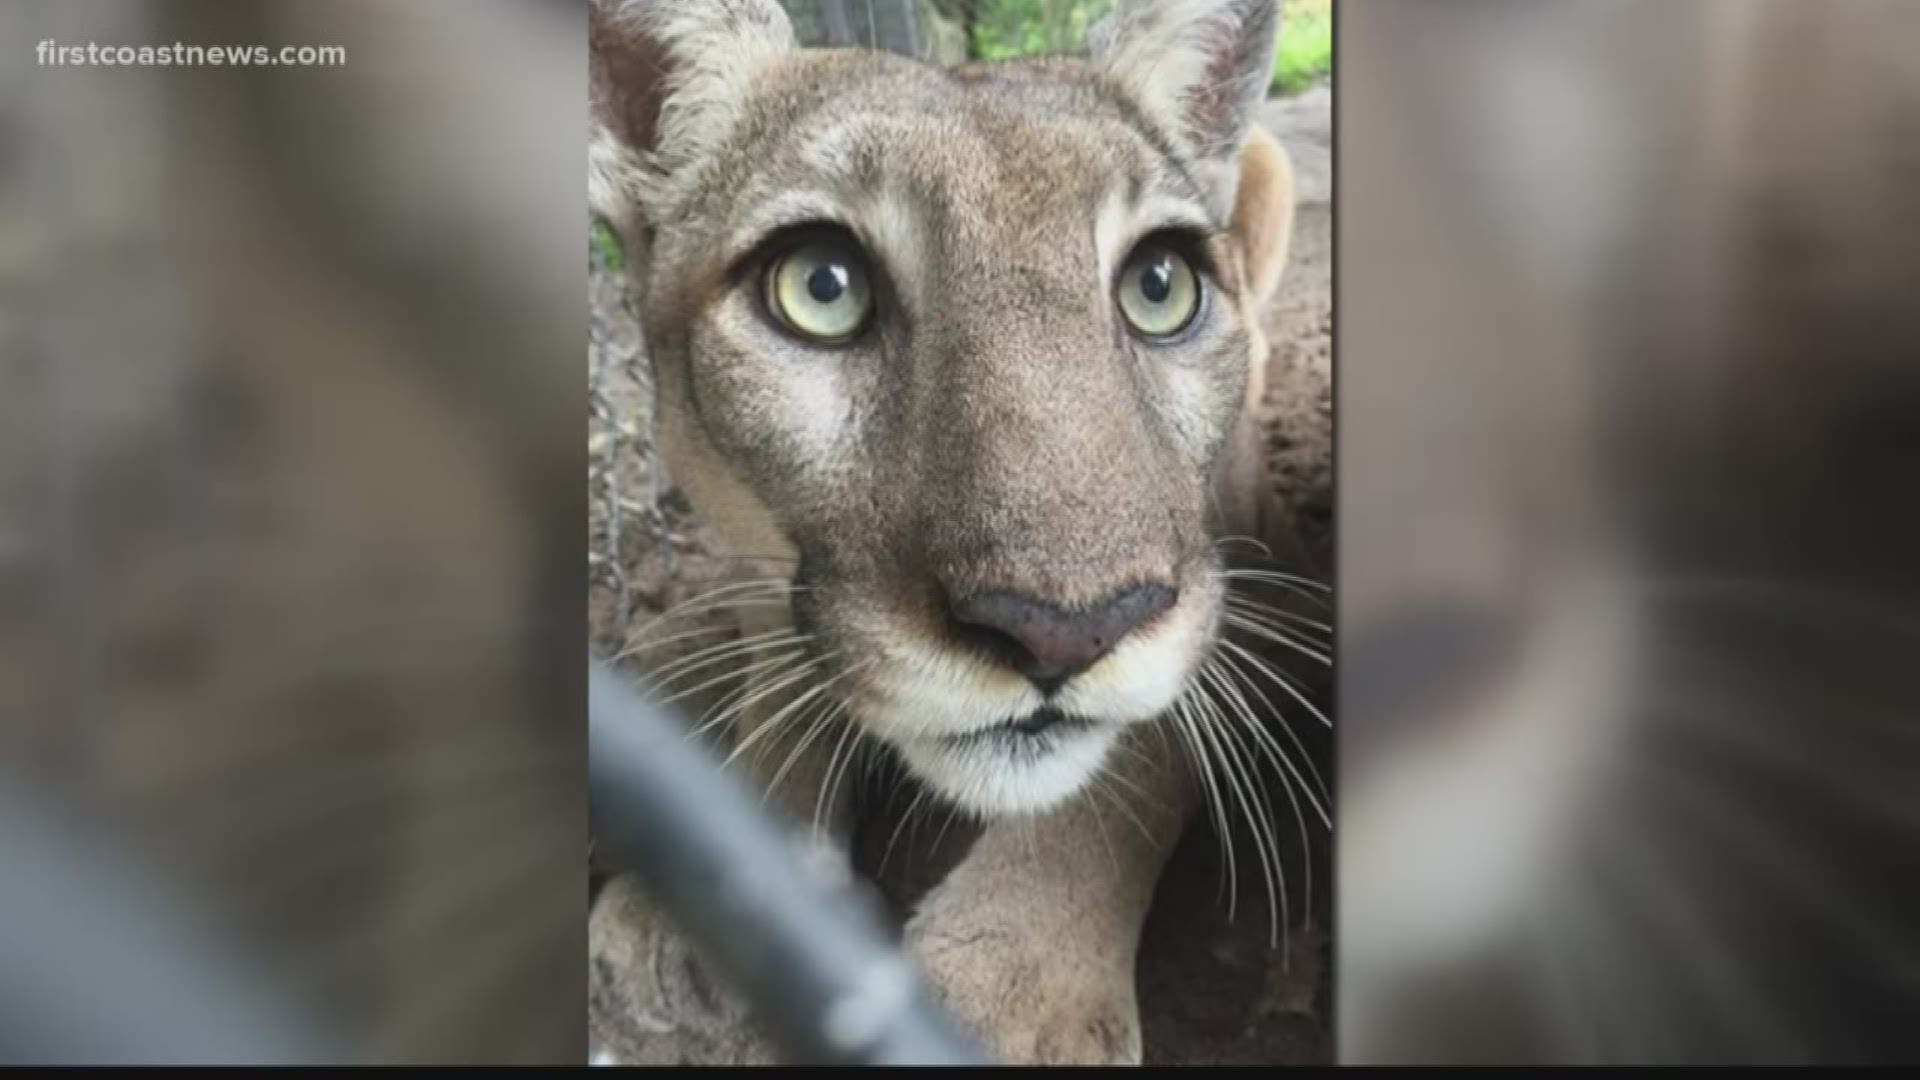 The Zoo says that Babs was rescued as a kitten with her sister Kakki and brought to the Zoo after their mother abandoned them. Both panthers have been with the Jacksonville Zoo and Gardens since March 2005.